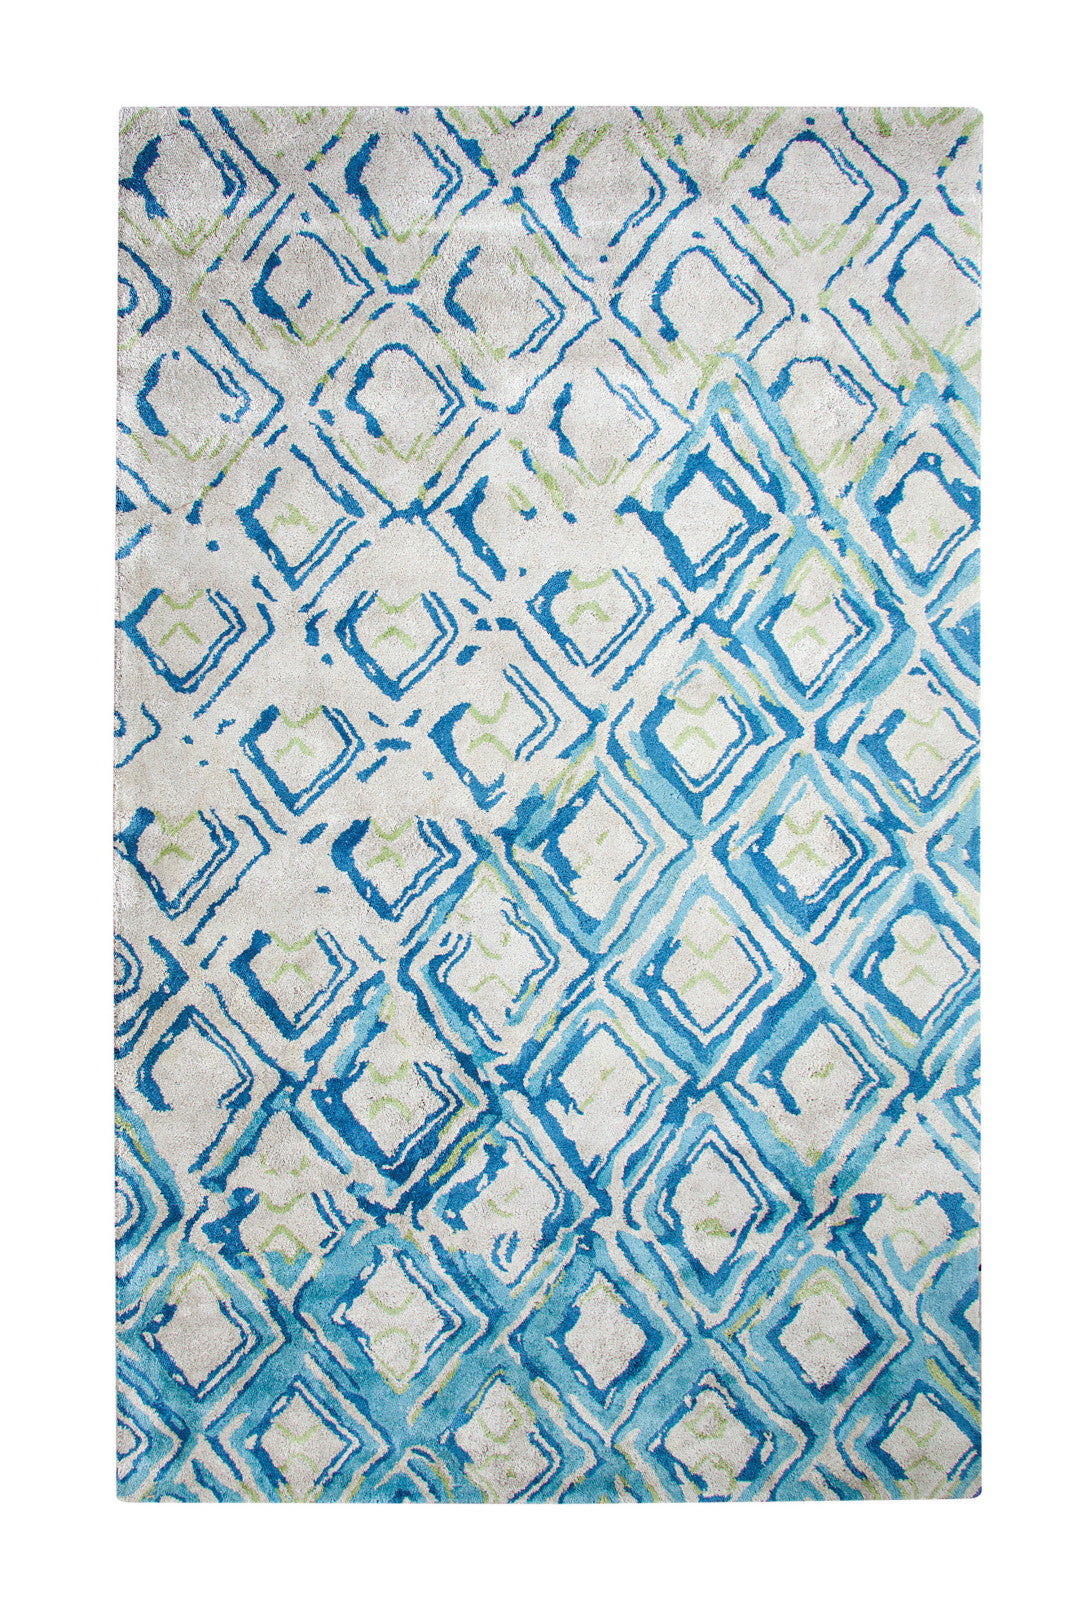 Dynamic Rugs Vogue 881003 Grey/Turquoise Area Rug main image